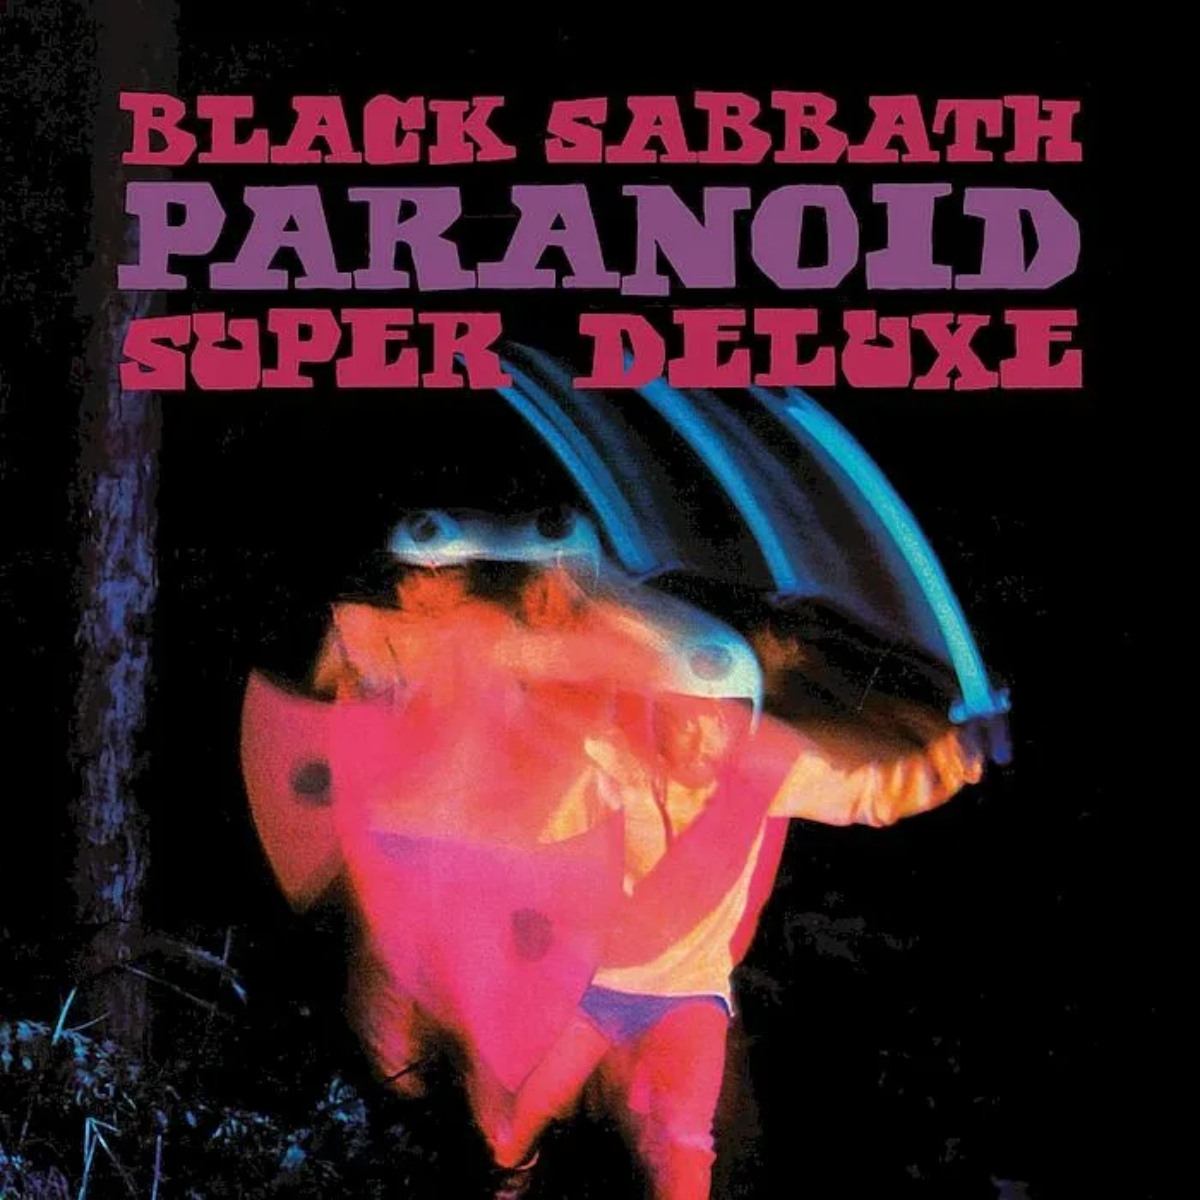 Cover of the "Paranoid" album by Black Sabbath